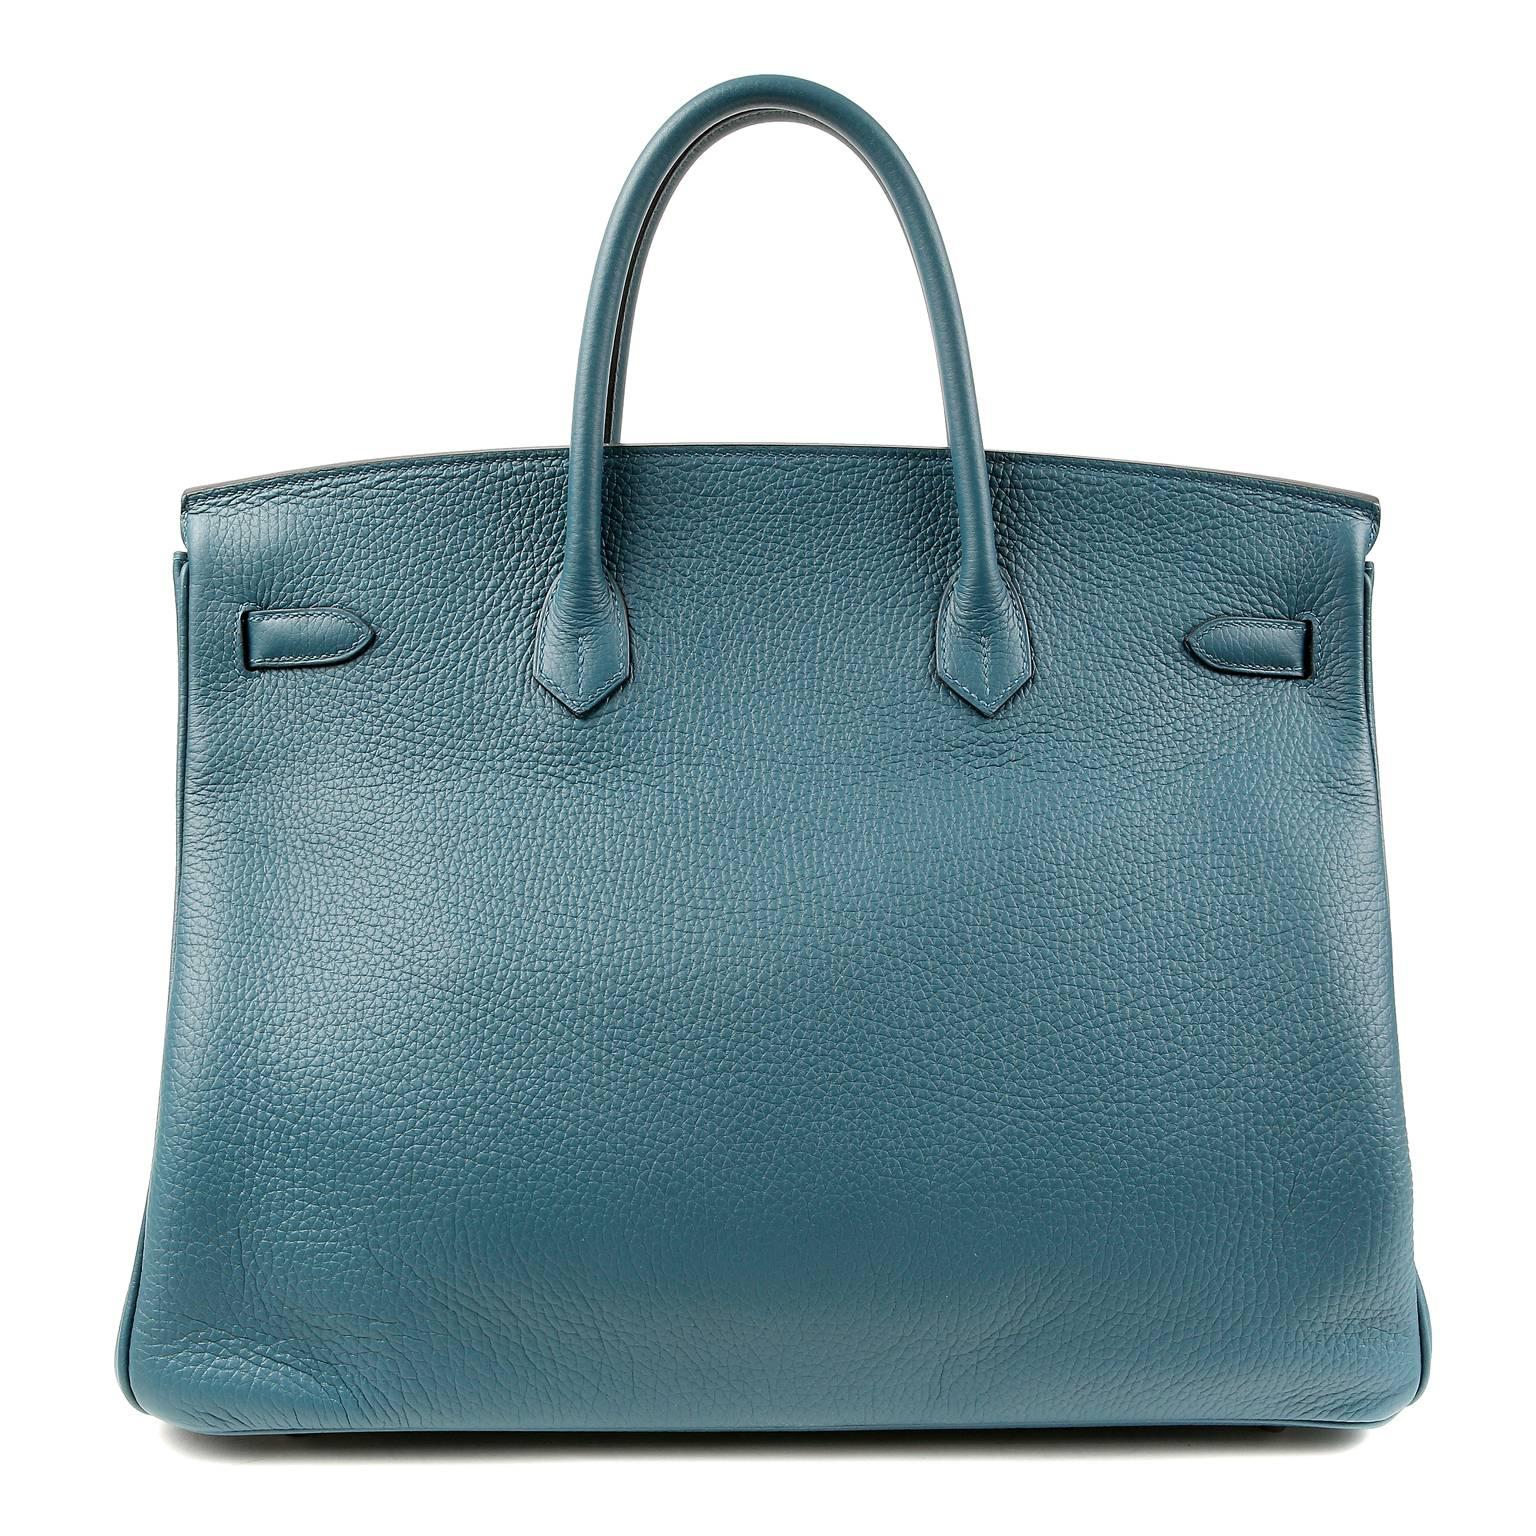 Hermès Blue Colvert Togo 40 cm Birkin- Pristine  Condition
 Hand stitched by skilled craftsmen, wait lists of a year or more are common for the Hermès Birkin. They are considered the ultimate in luxury fashion. Blue Colvert is soft and muted blue; a